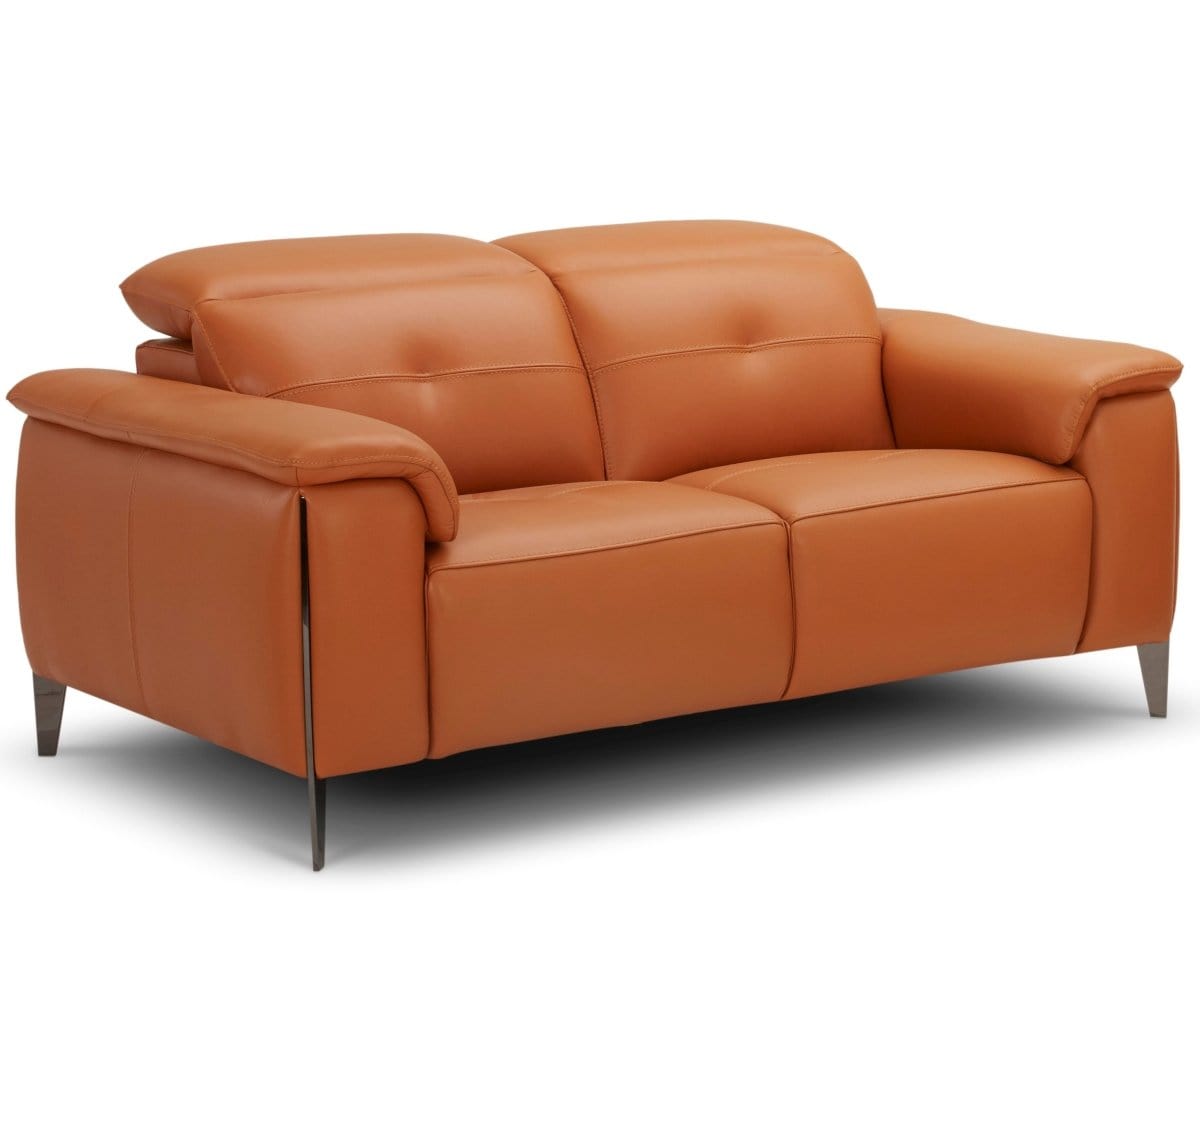 KUKA KM.5065 Electrical Fabric Recliner Sofa 2/3-Seater (Fabric C) (I) picket and rail